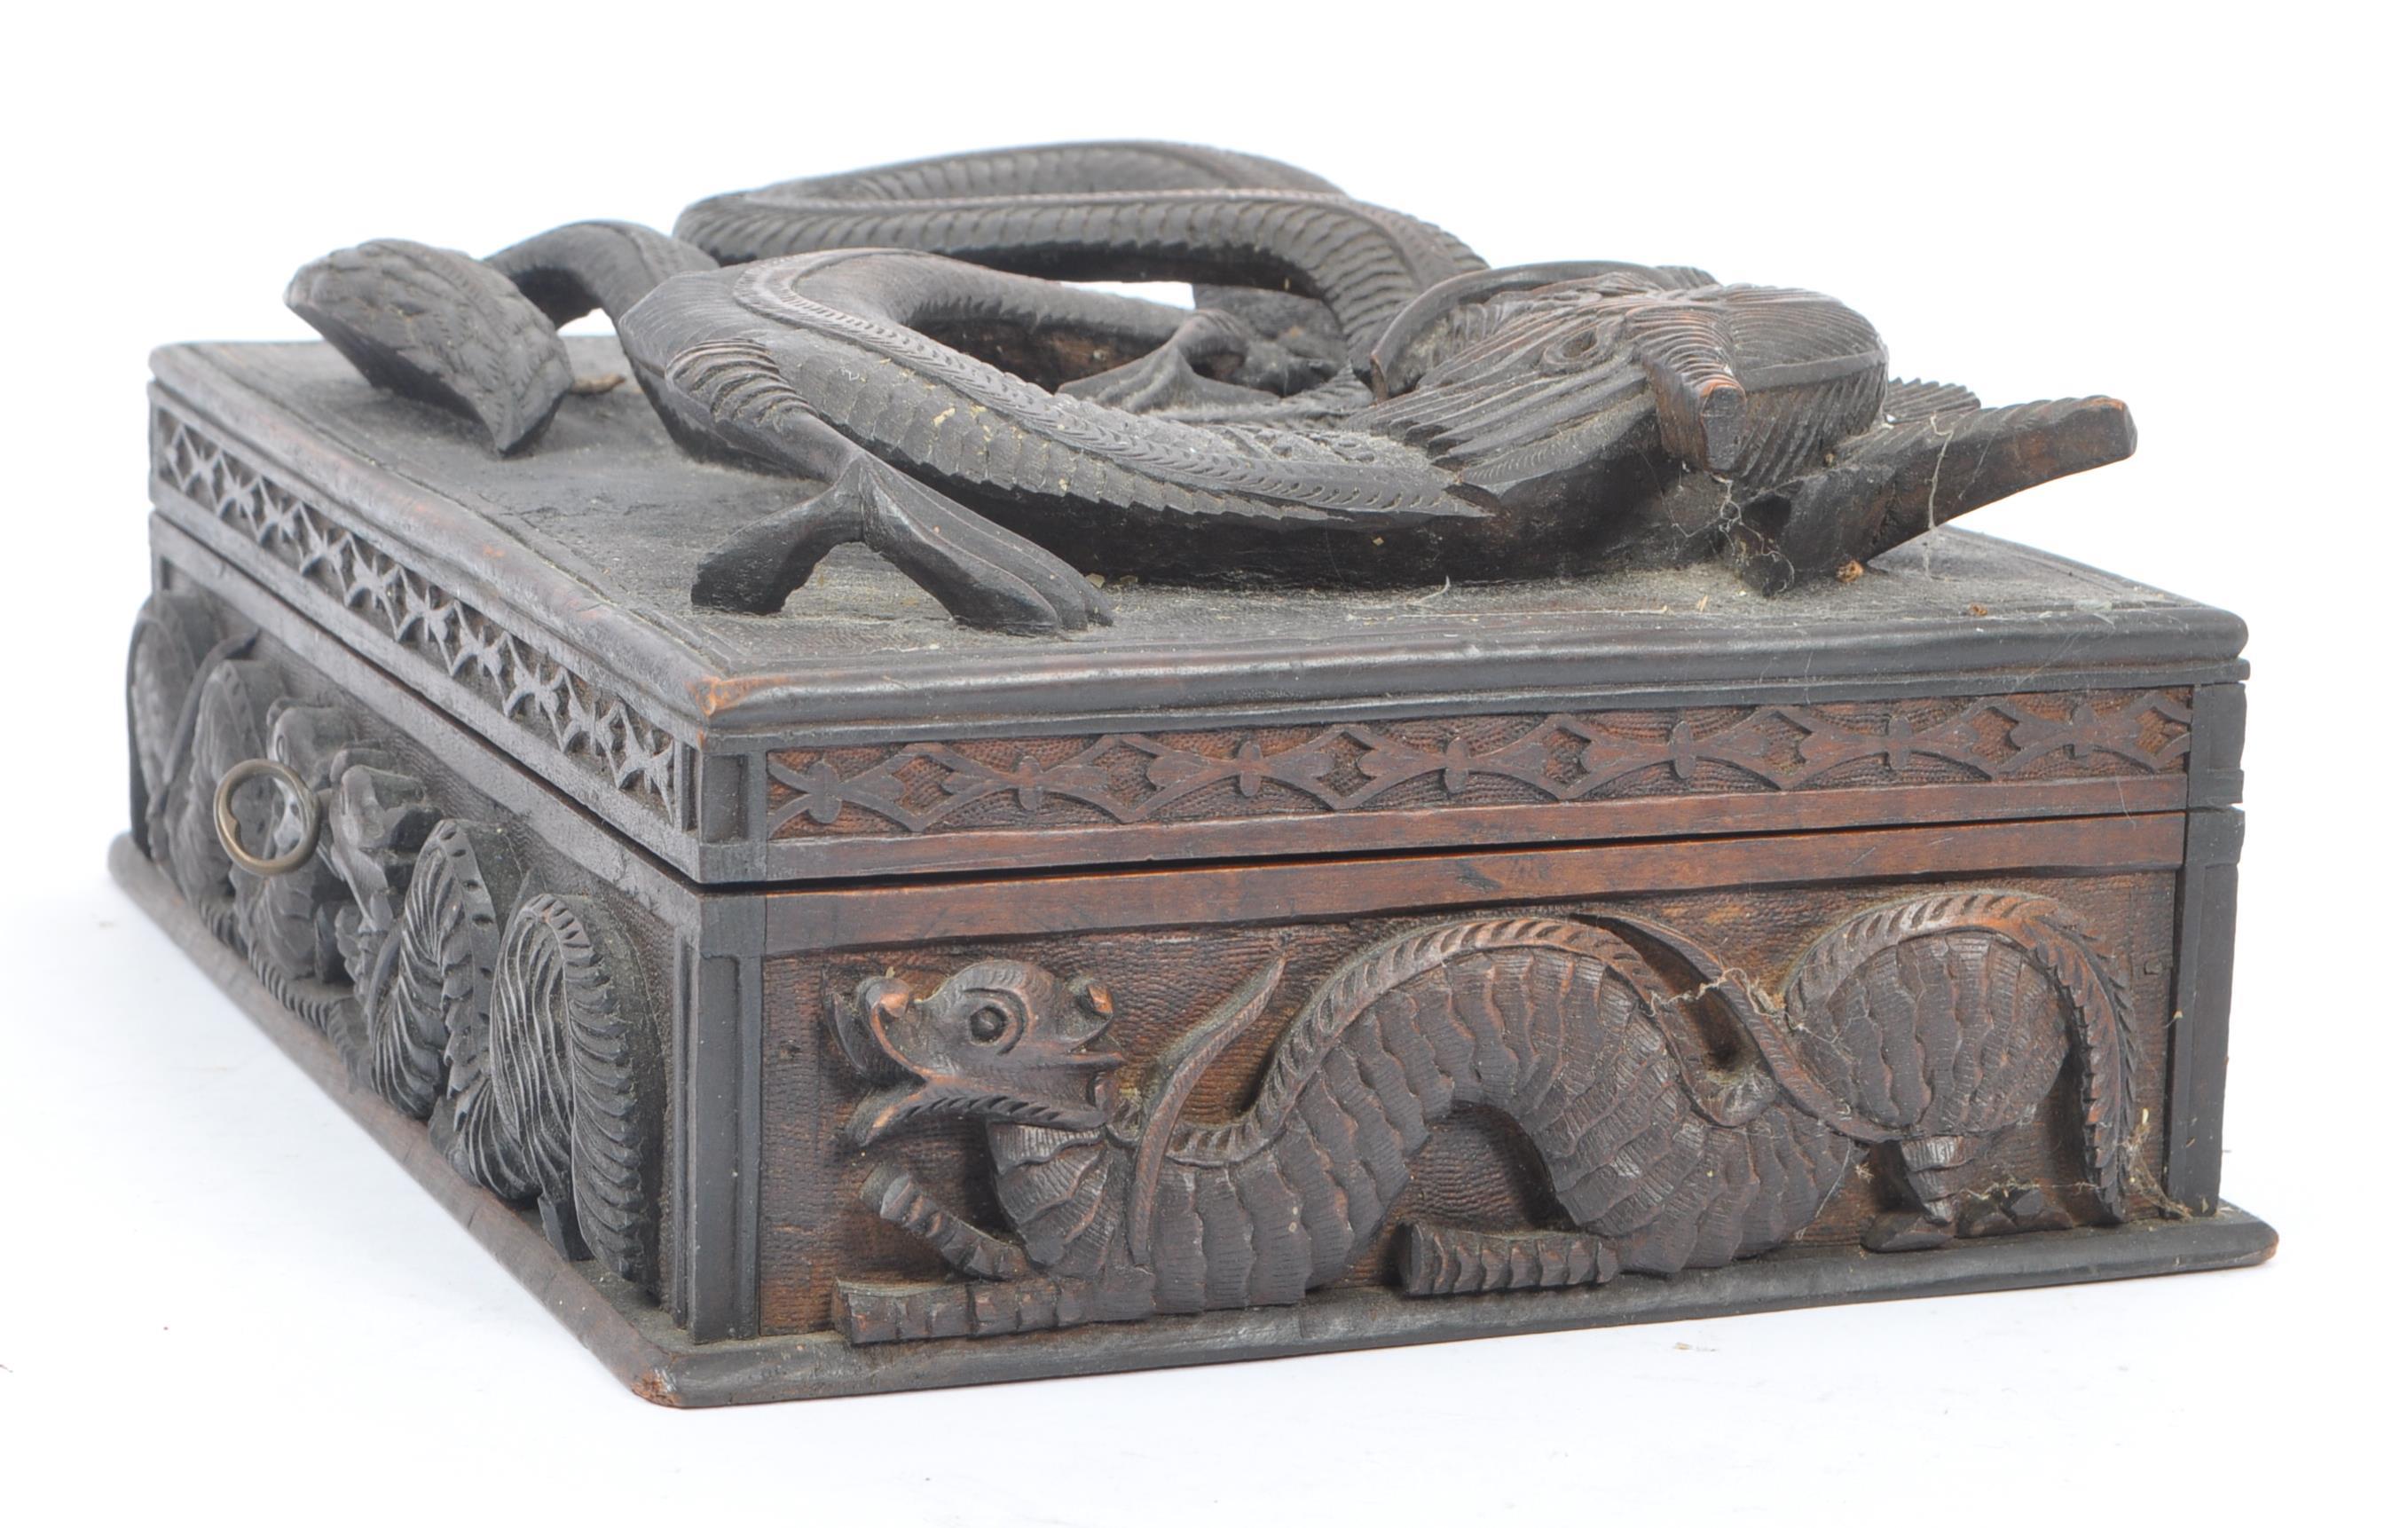 VINTAGE 20TH CENTURY ASIAN CARVED DRAGON BOX - Image 5 of 6